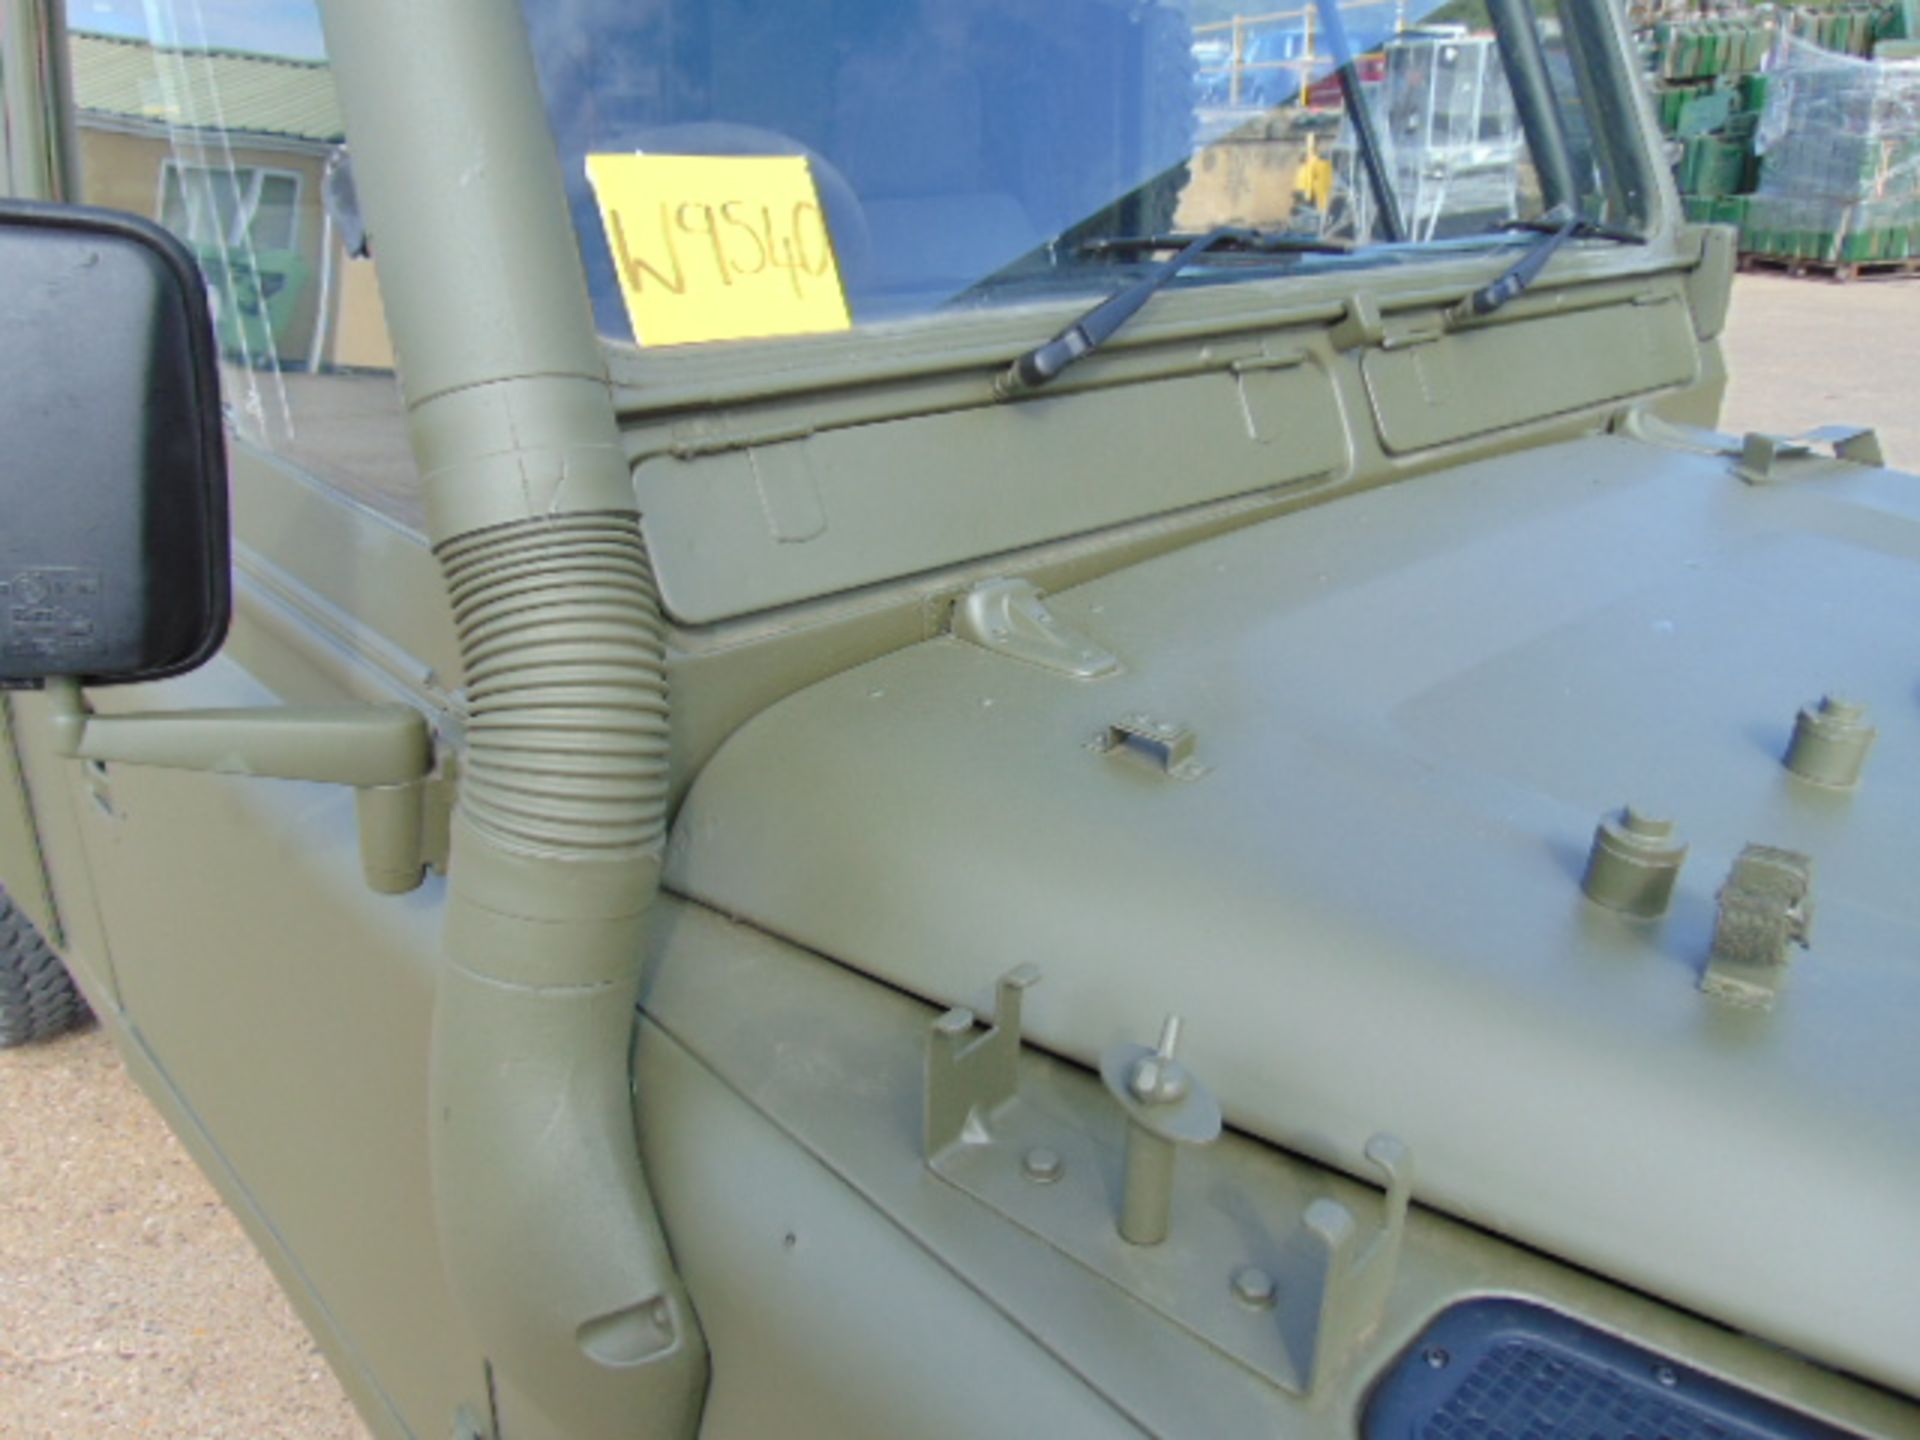 Military Specification Land Rover Wolf 110 Hard Top - Image 9 of 28